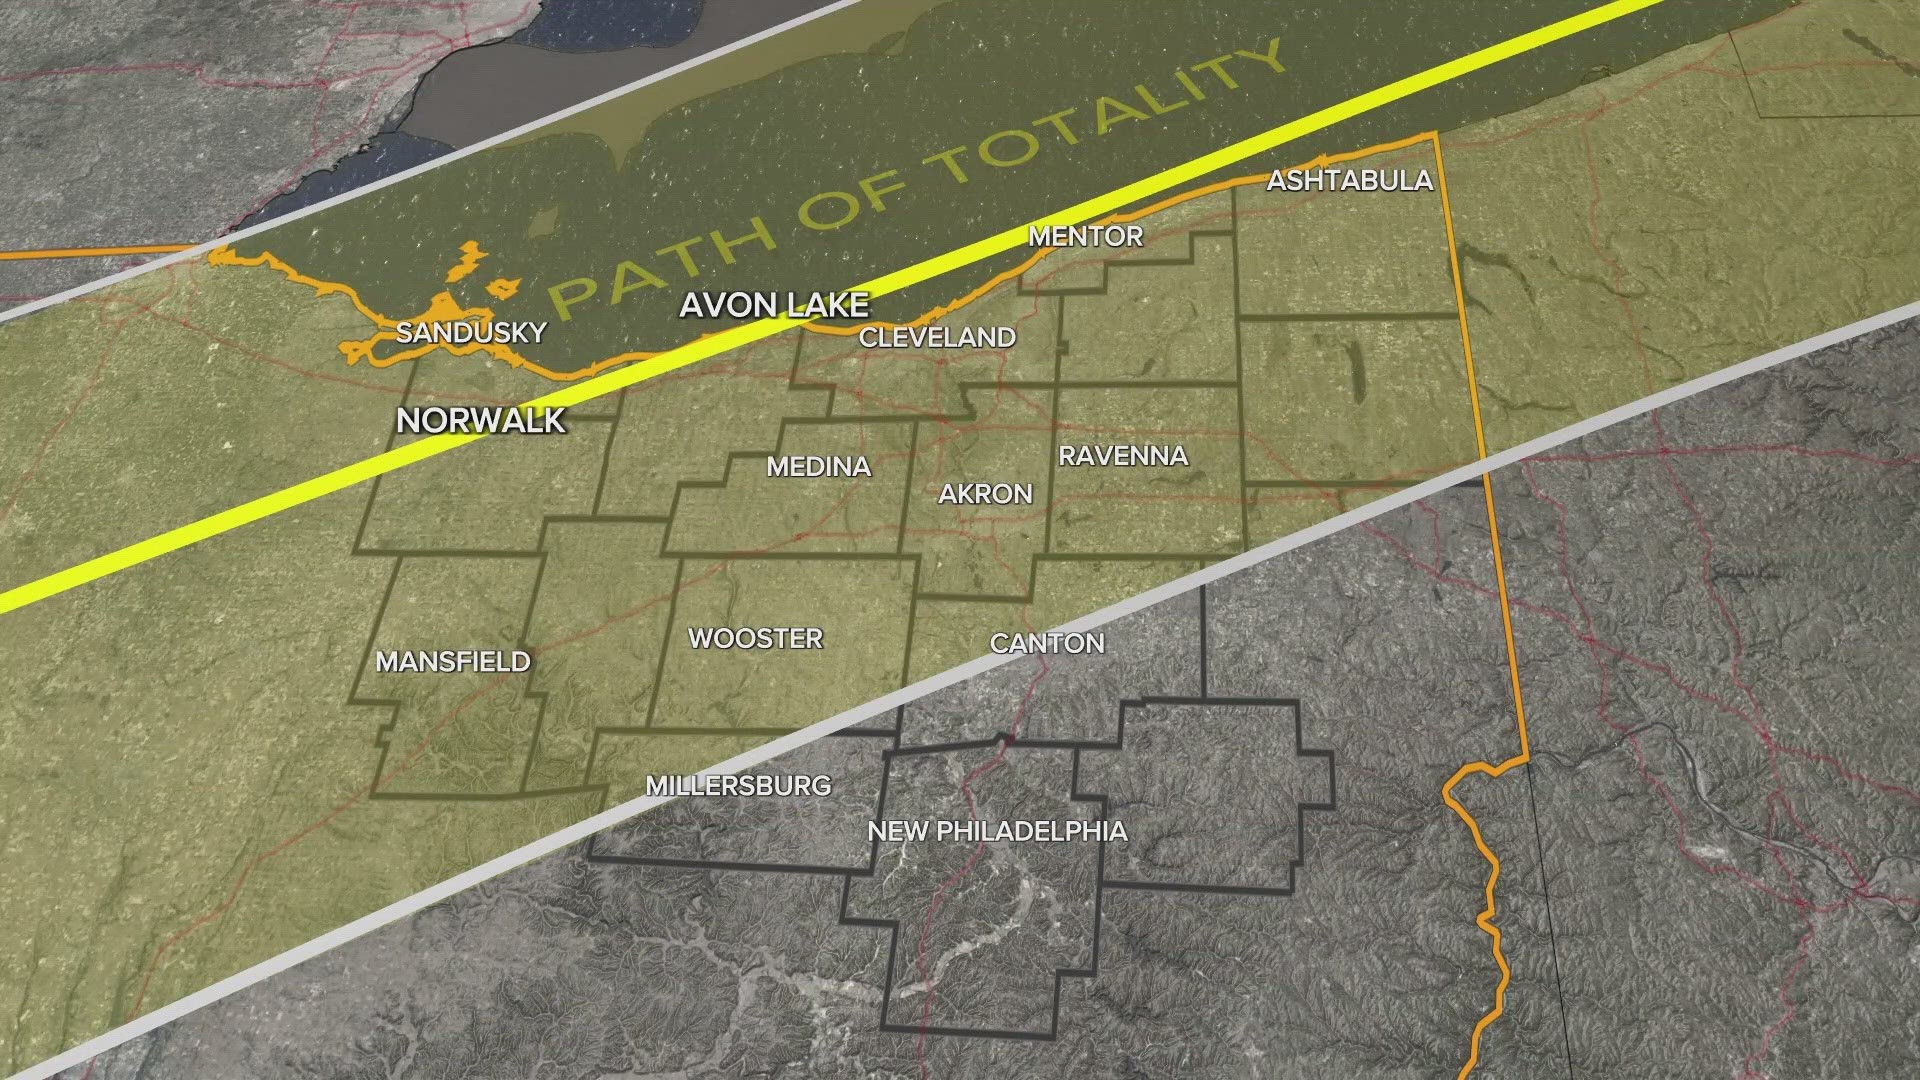 Northeast Ohio takes center stage for the April 8 solar eclipse as the path of totality cuts right through the region.